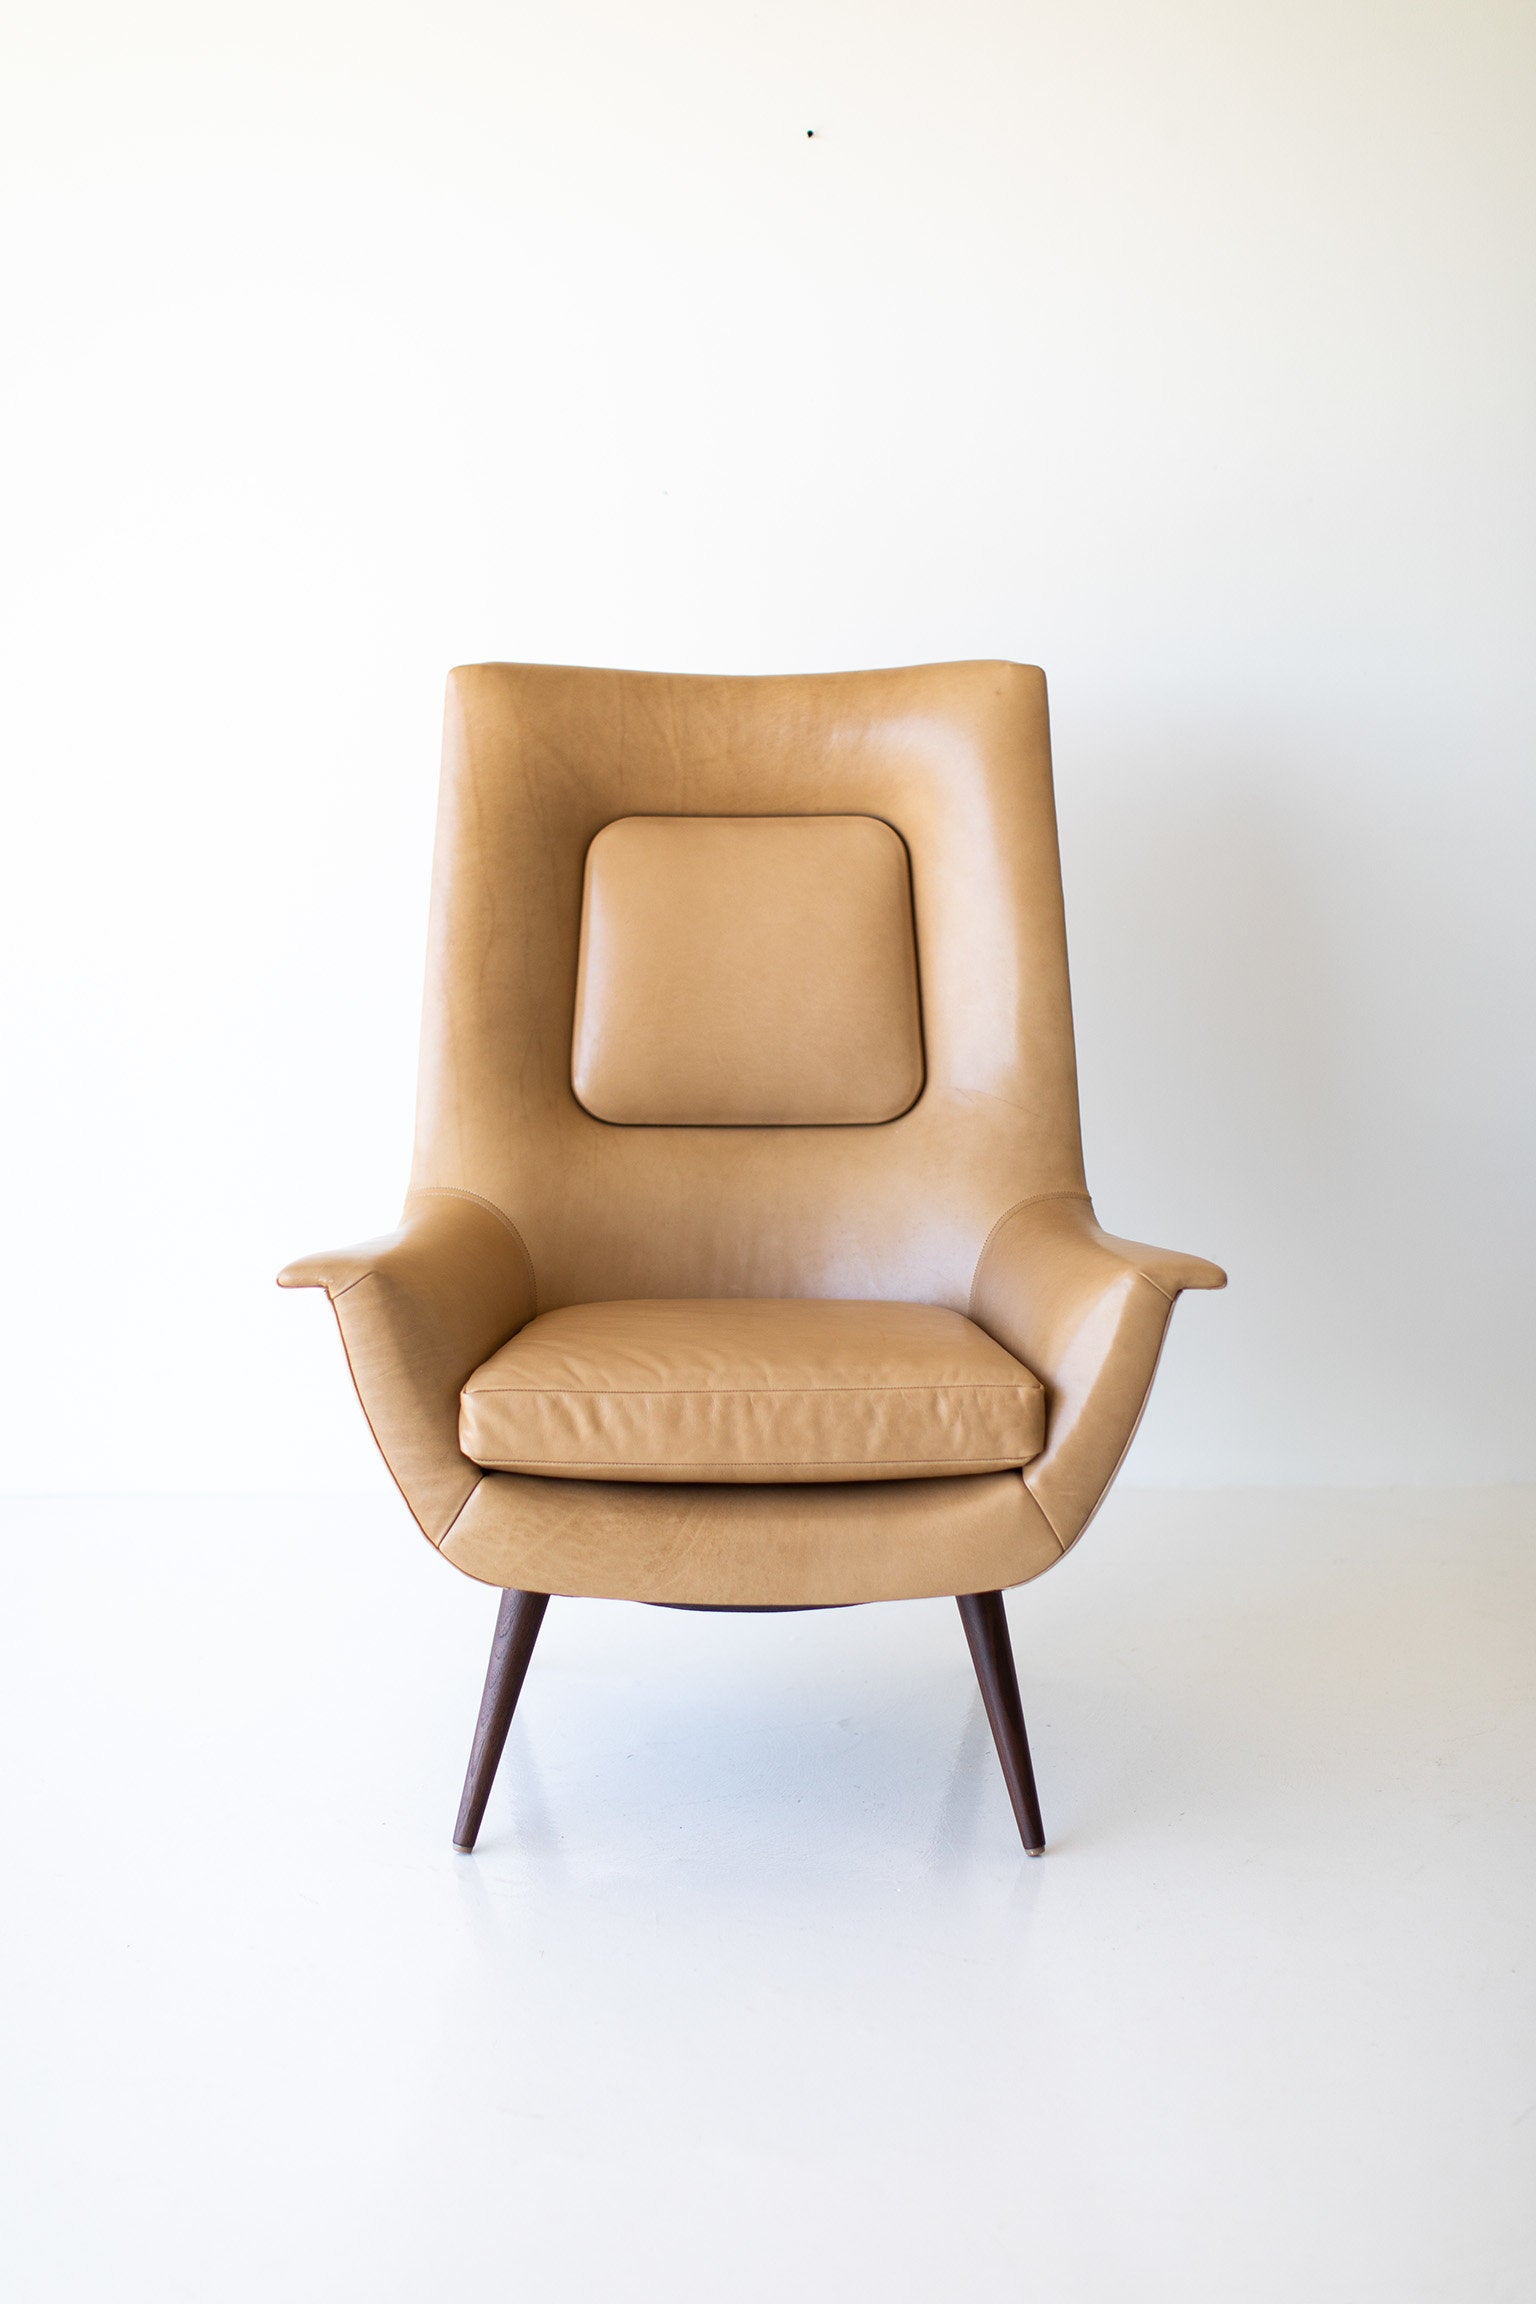 lawrence-peabody-chair-08